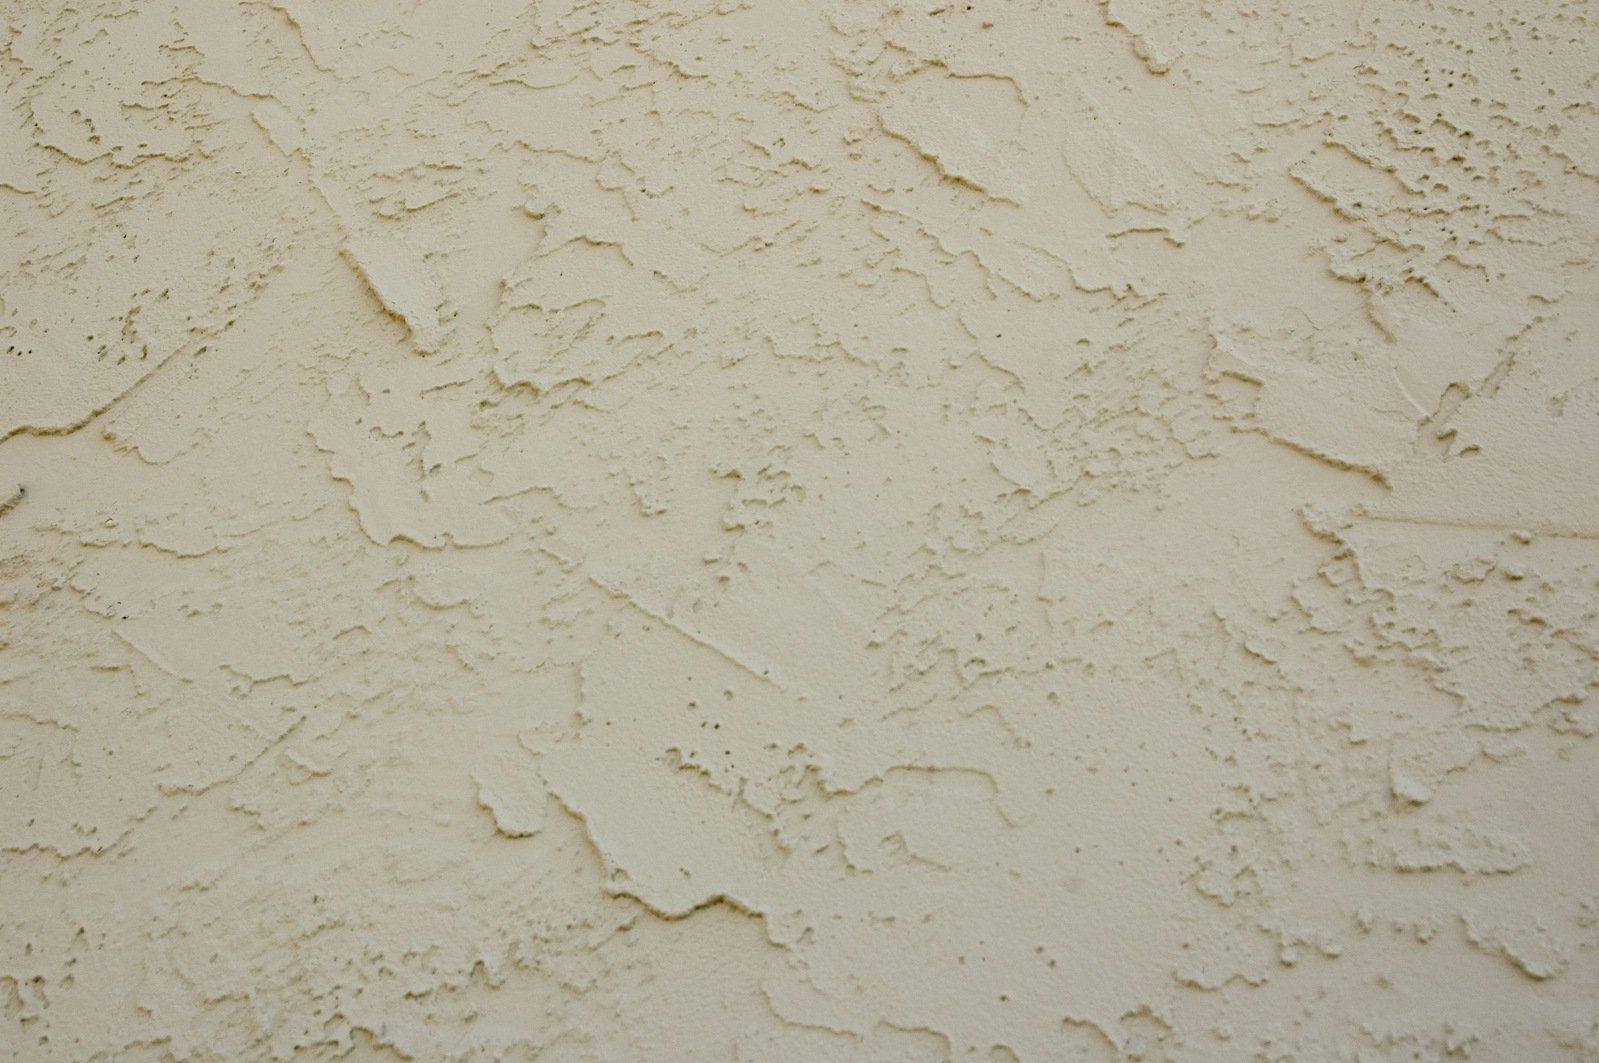 a close up of a paint covered wall with peeling white paint